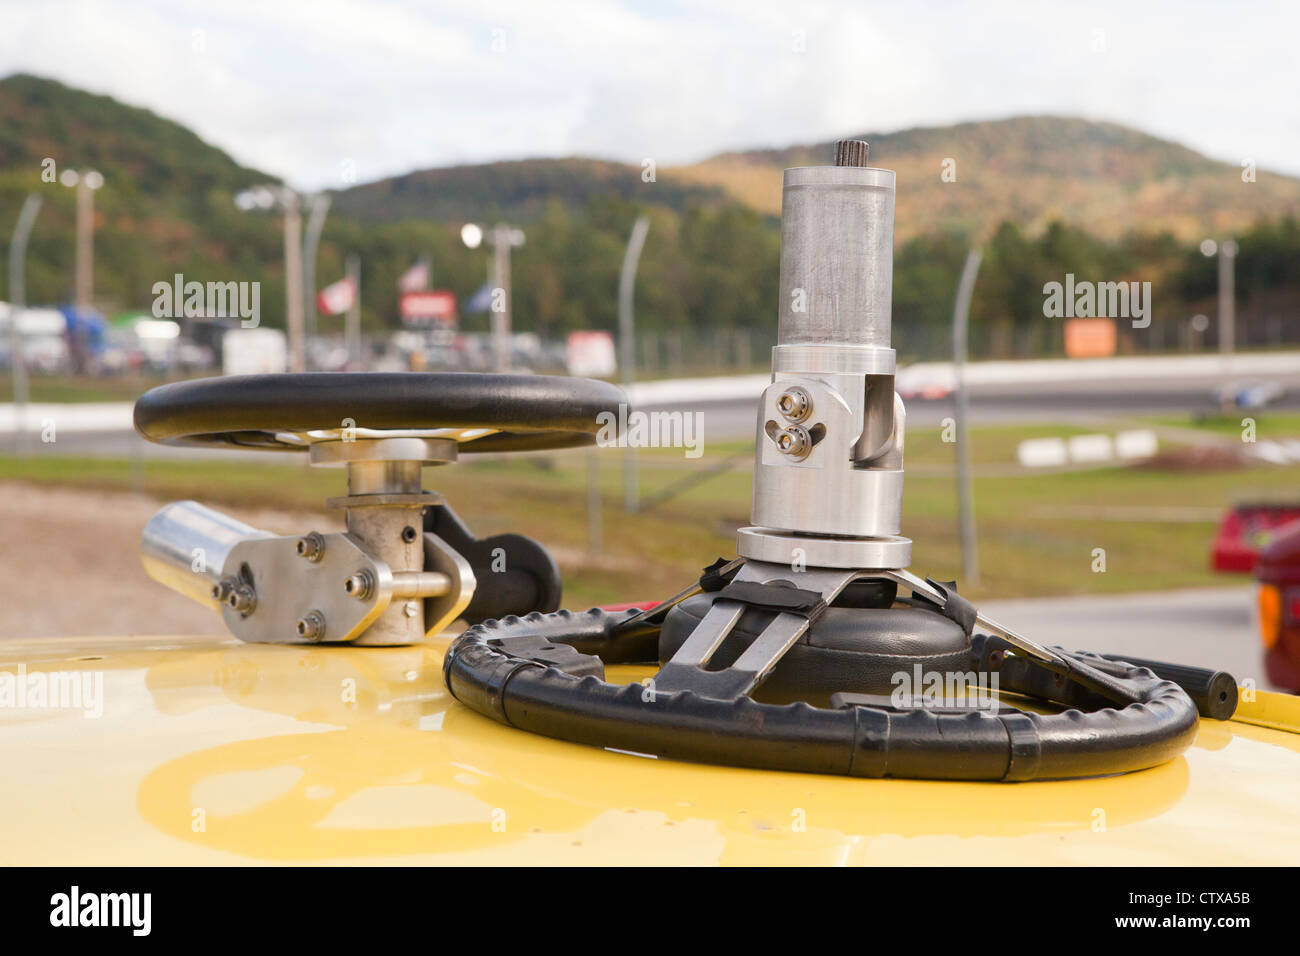 Practice wheel for hand controlled simulator on the top of a stock car for racing Stock Photo